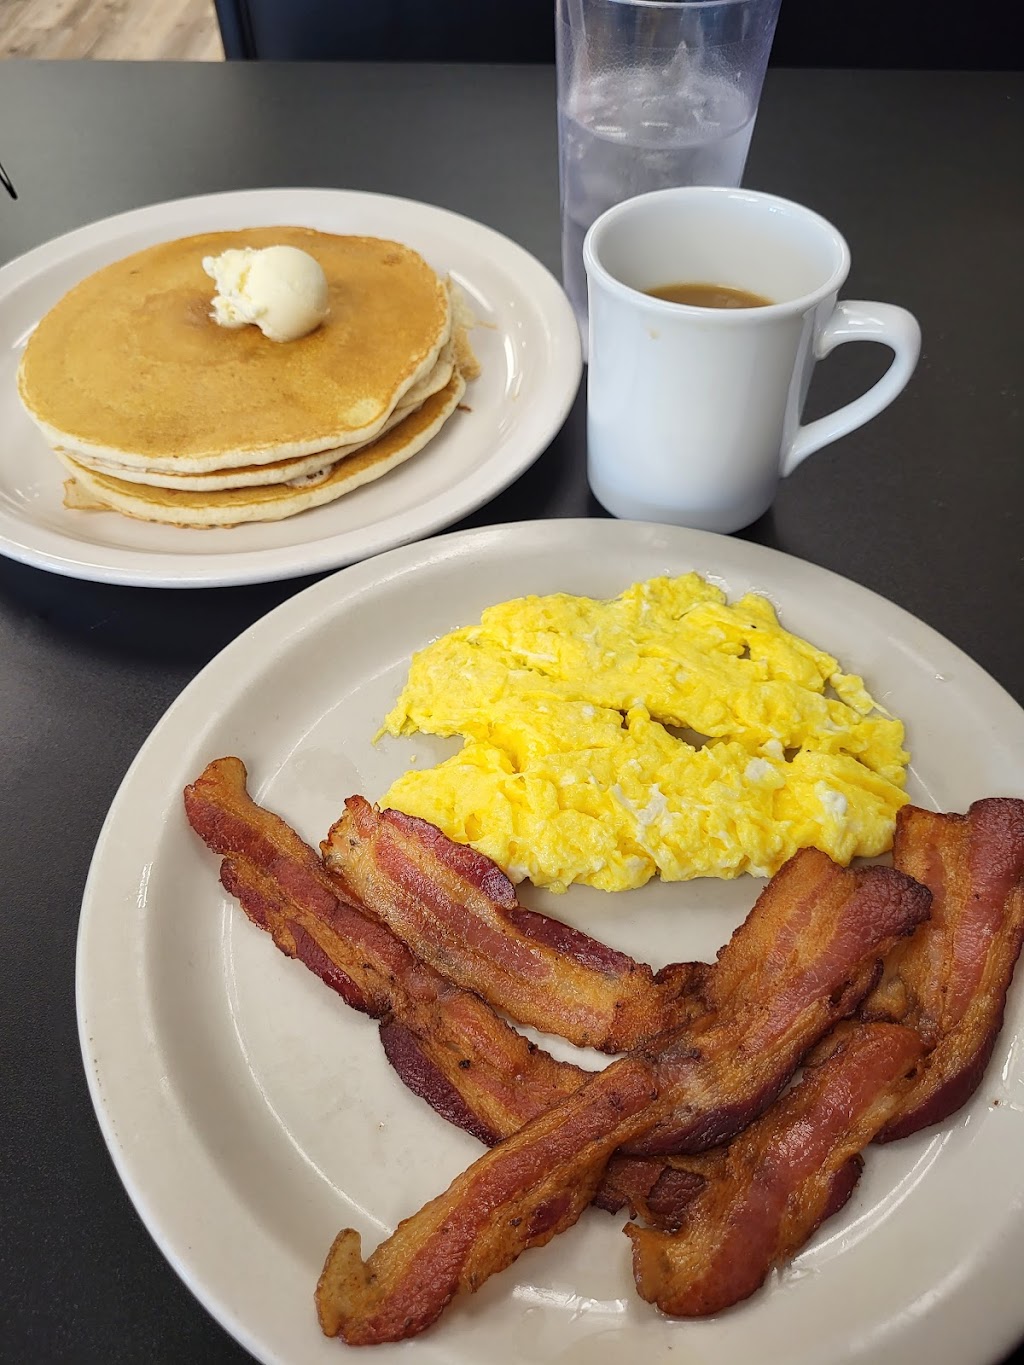 The Pancake House Westerville Family Diner. | 129 W Schrock Rd, Westerville, OH 43081 | Phone: (614) 898-6500